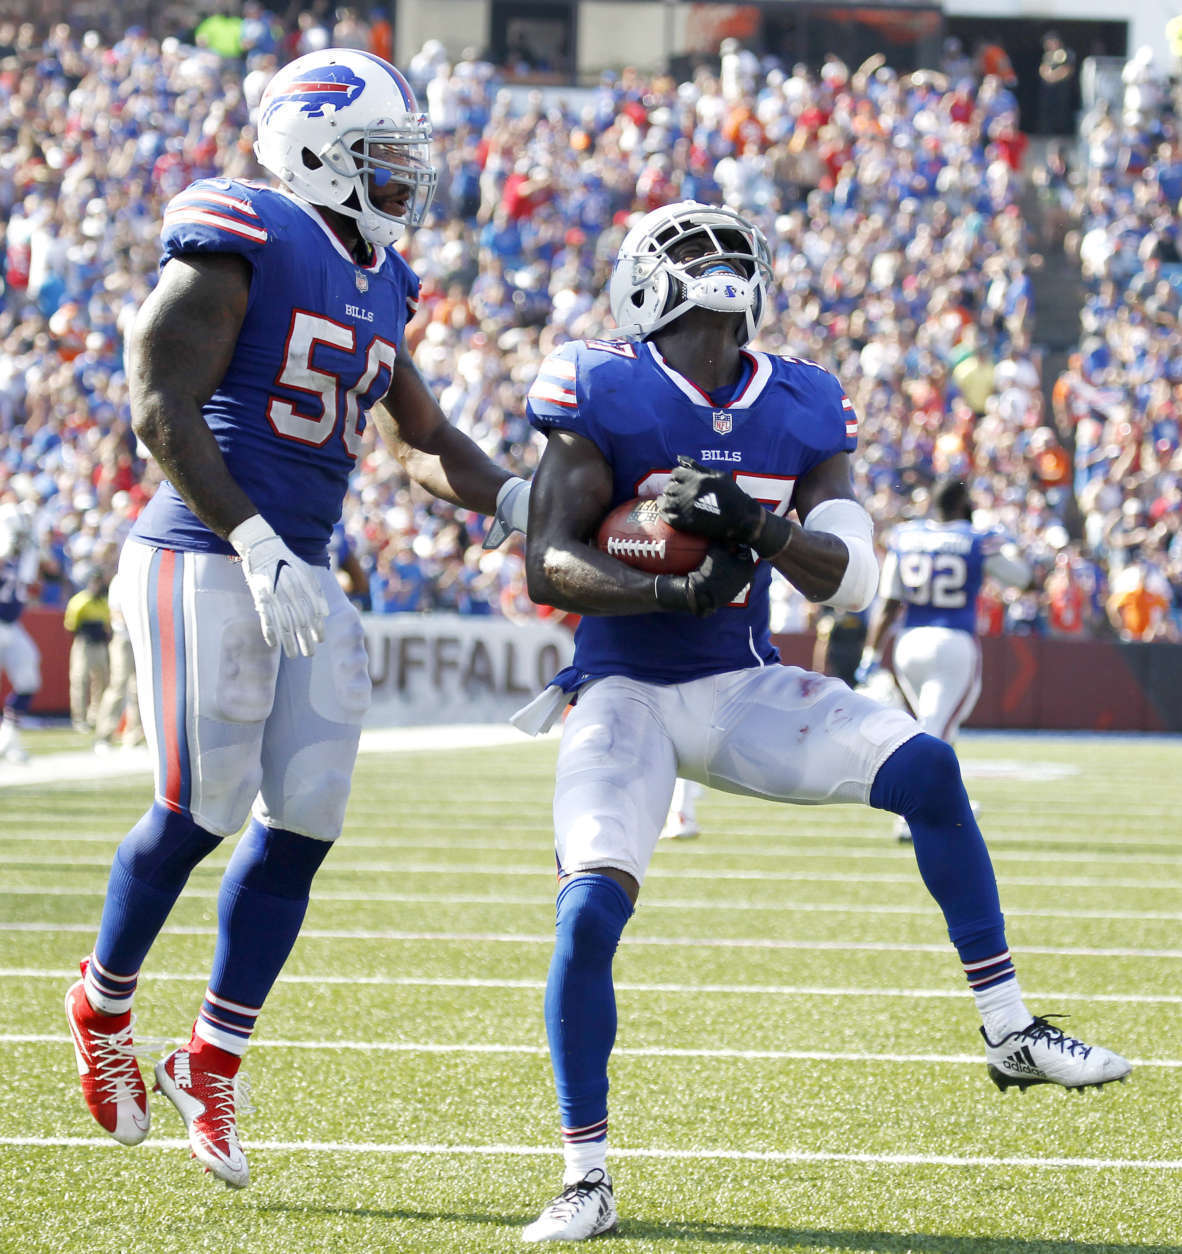 Buffalo Bills cornerback Tre'Davious White, right, and outside linebacker Ramon Humber celebrate White's interception on a pass from Denver Broncos quarterback Trevor Siemian, not pictured, during the second half of an NFL football game, Sunday, Sept. 24, 2017, in Orchard Park, N.Y. (AP Photo/Jeffrey T. Barnes)